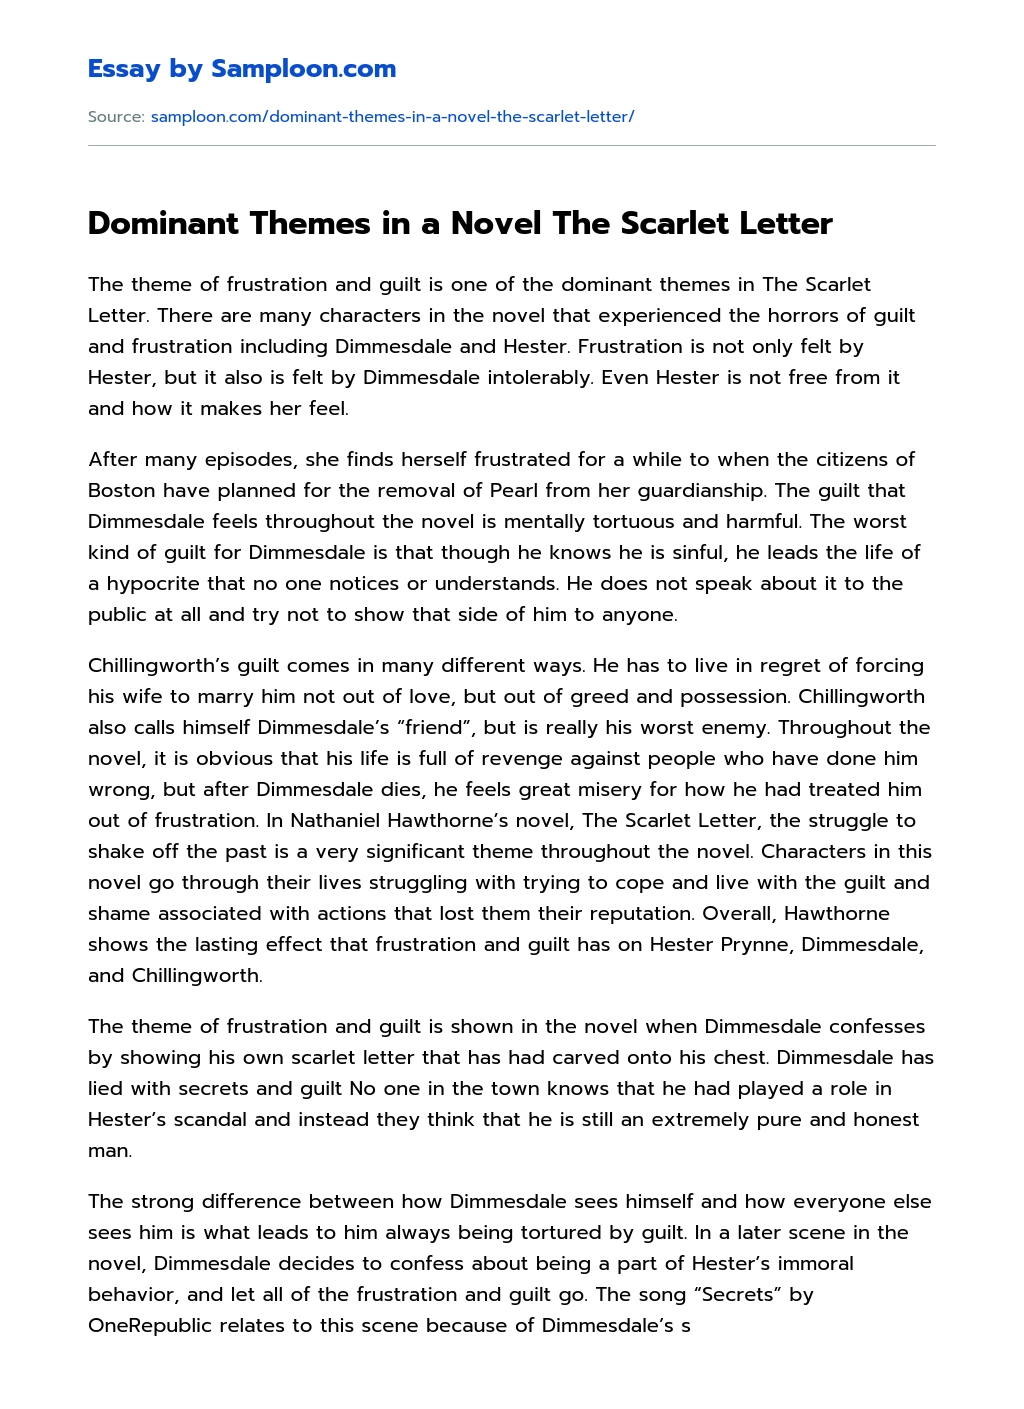 Dominant Themes in a Novel The Scarlet Letter essay